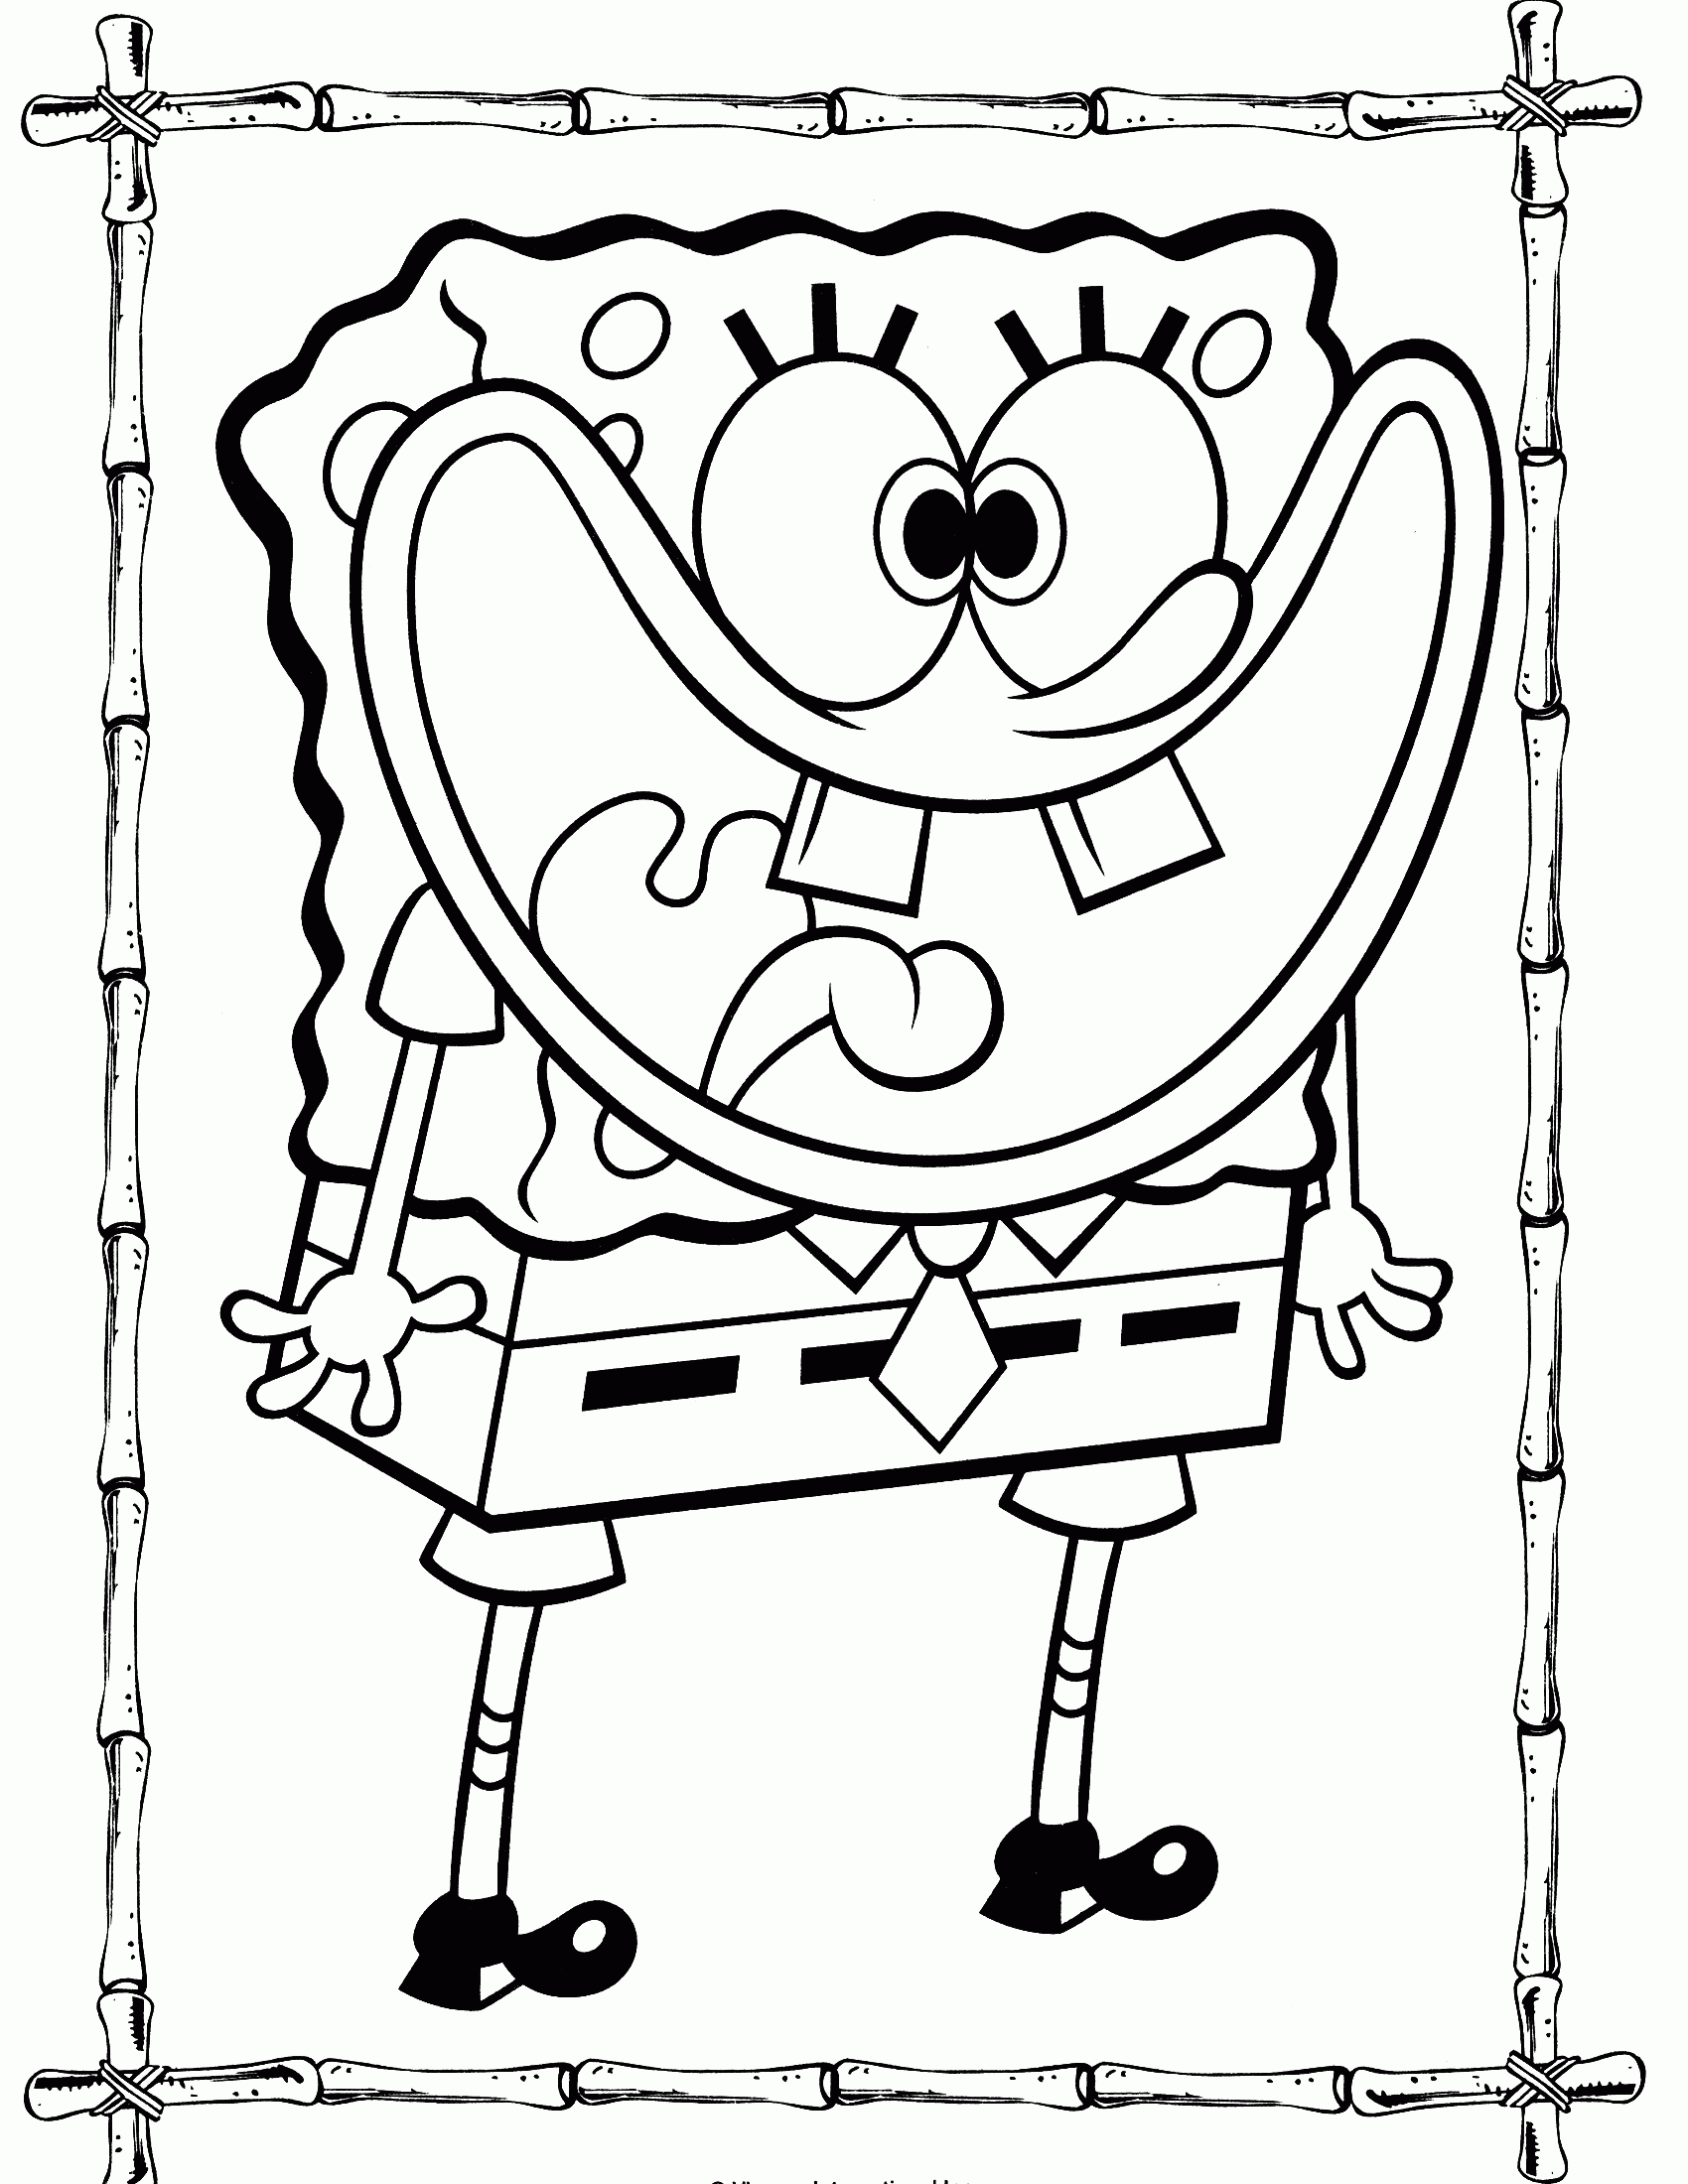 Spongebob Easter Coloring Pages - Coloring Home